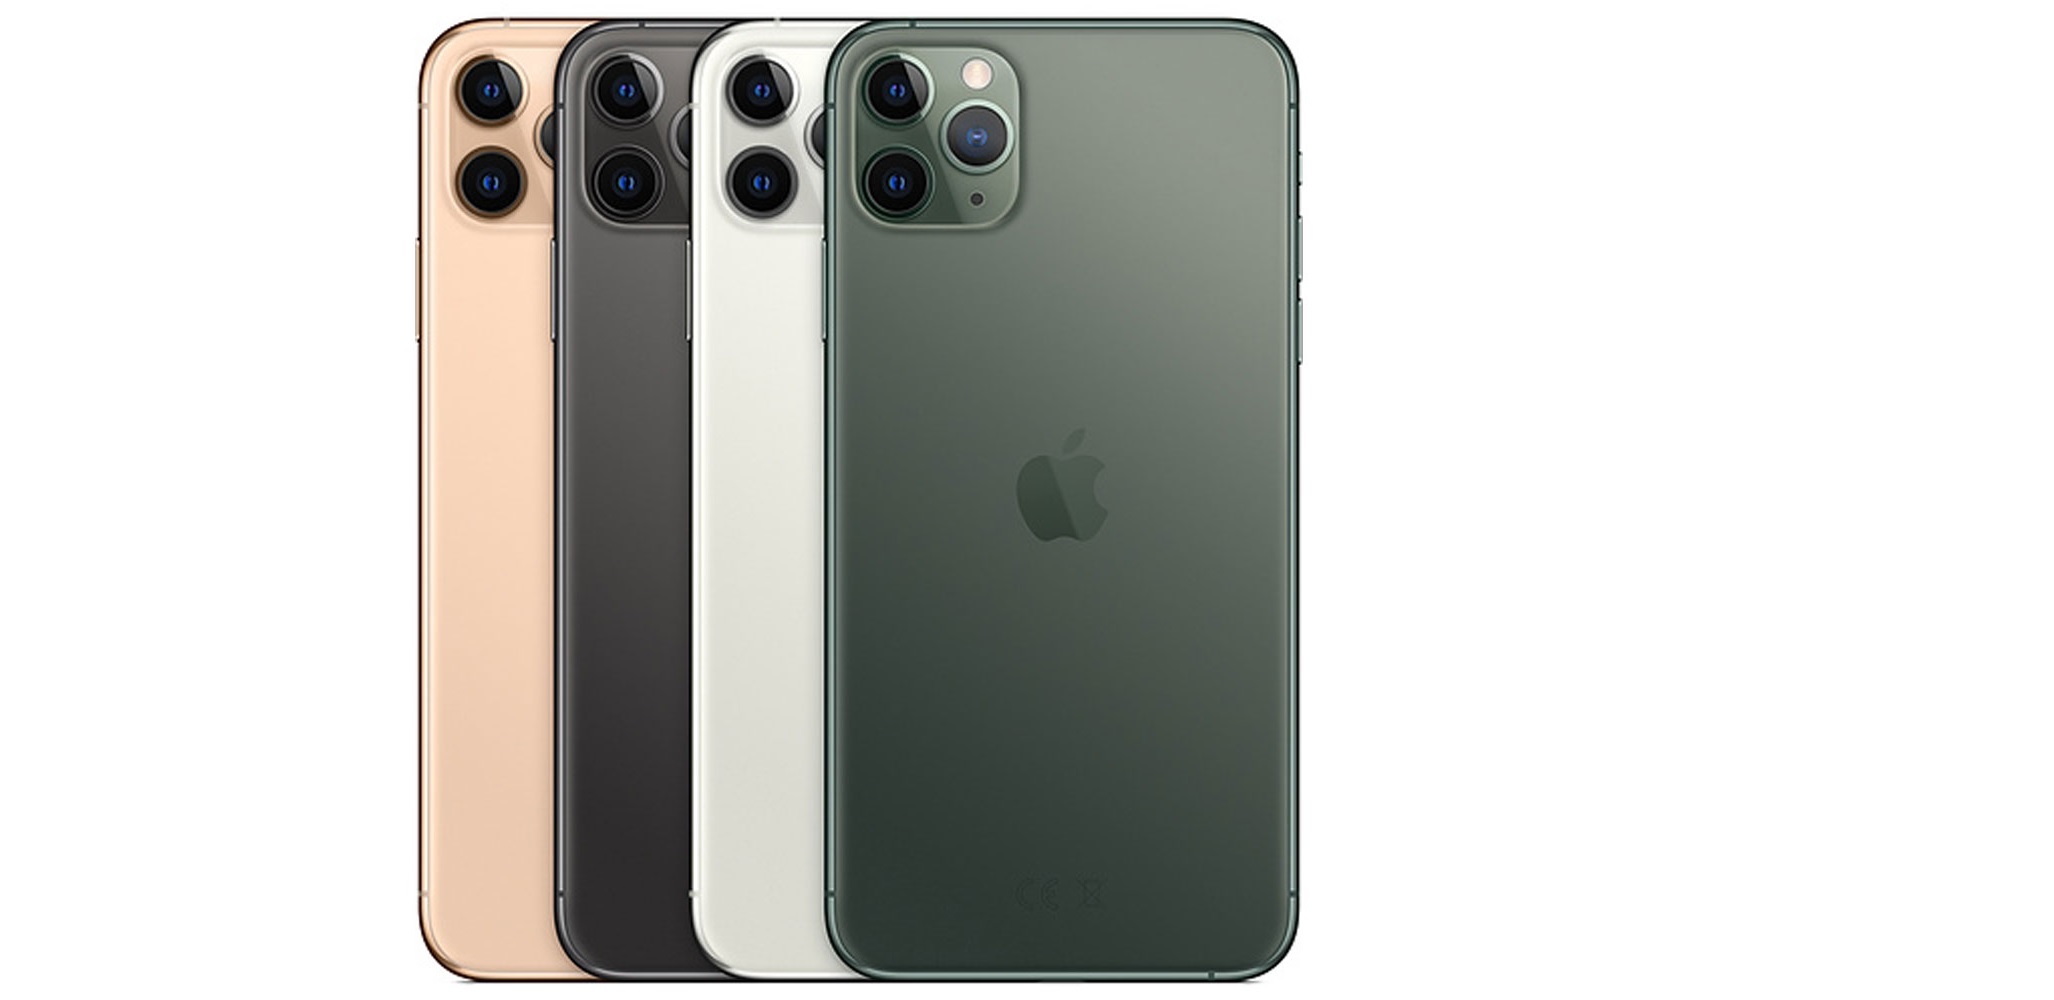 Apple Iphone 11 Pro Max color options.jpg